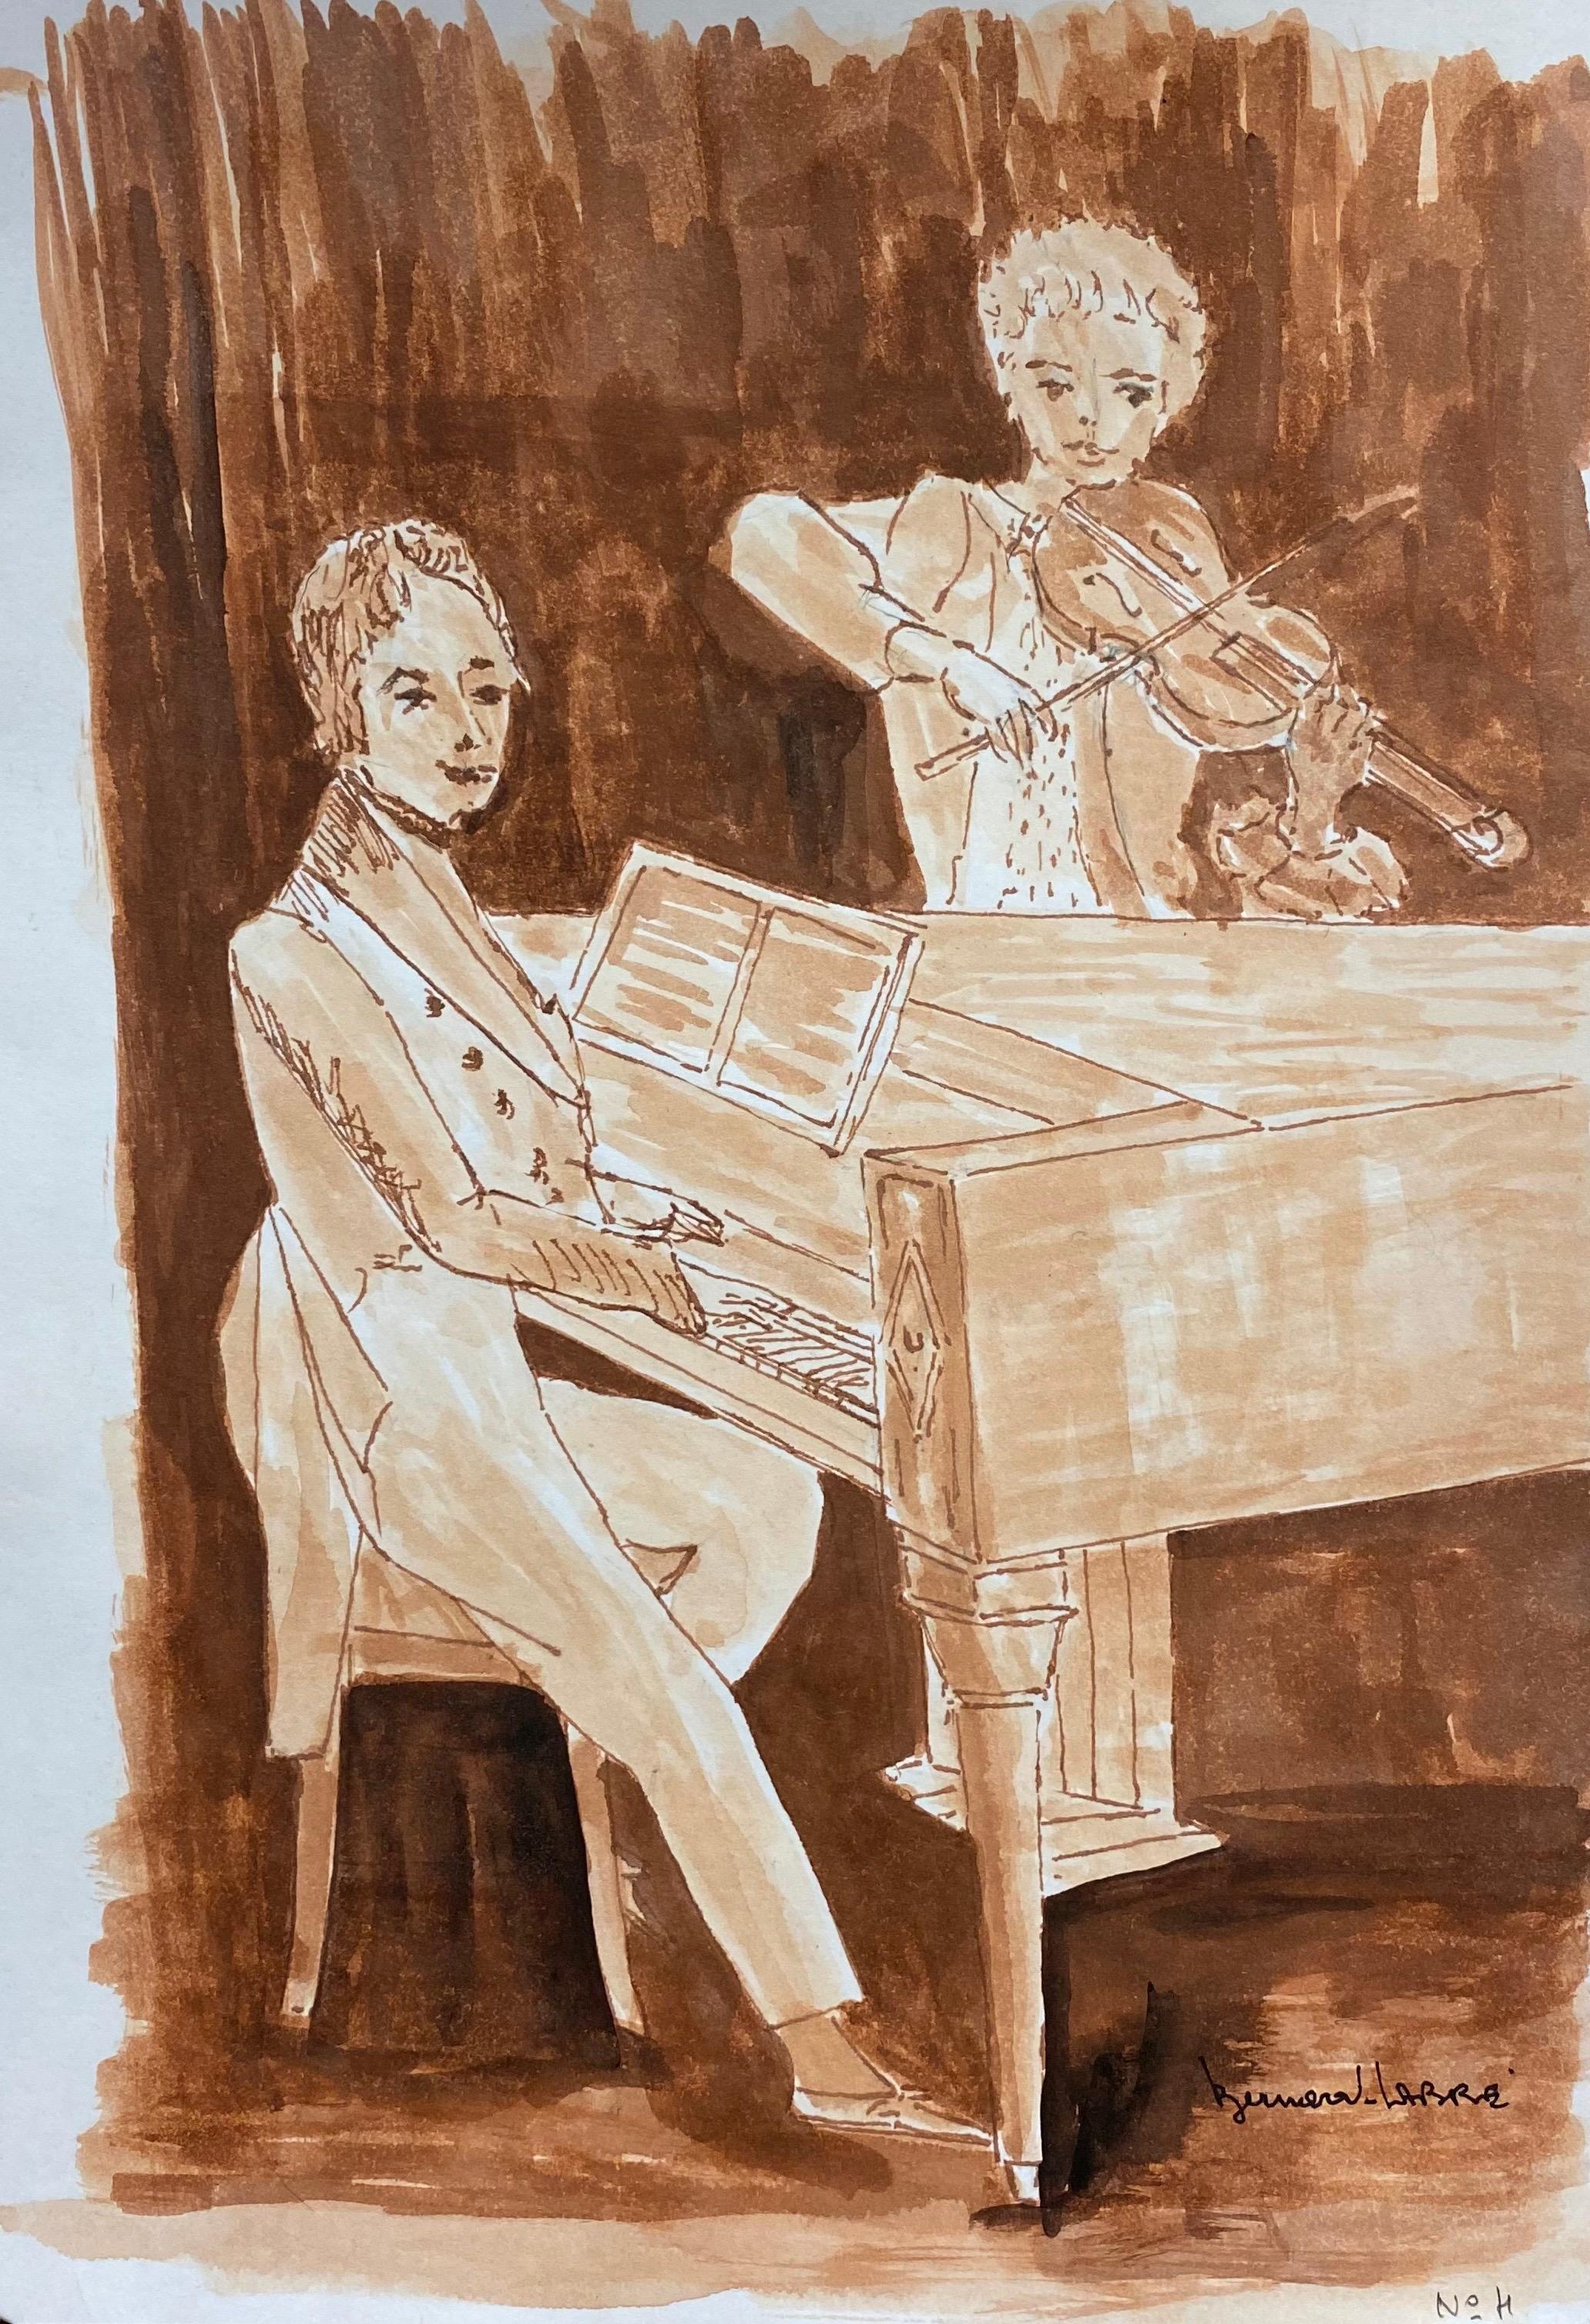 The Pianist & Violin Duet
by Bernard Labbe (French mid 20th century)
signed original watercolour/ gouache painting on paper, unframed
size: 11.75 x 8.75 inches
condition: very good and ready to be enjoyed. 

provenance: the artists atelier/